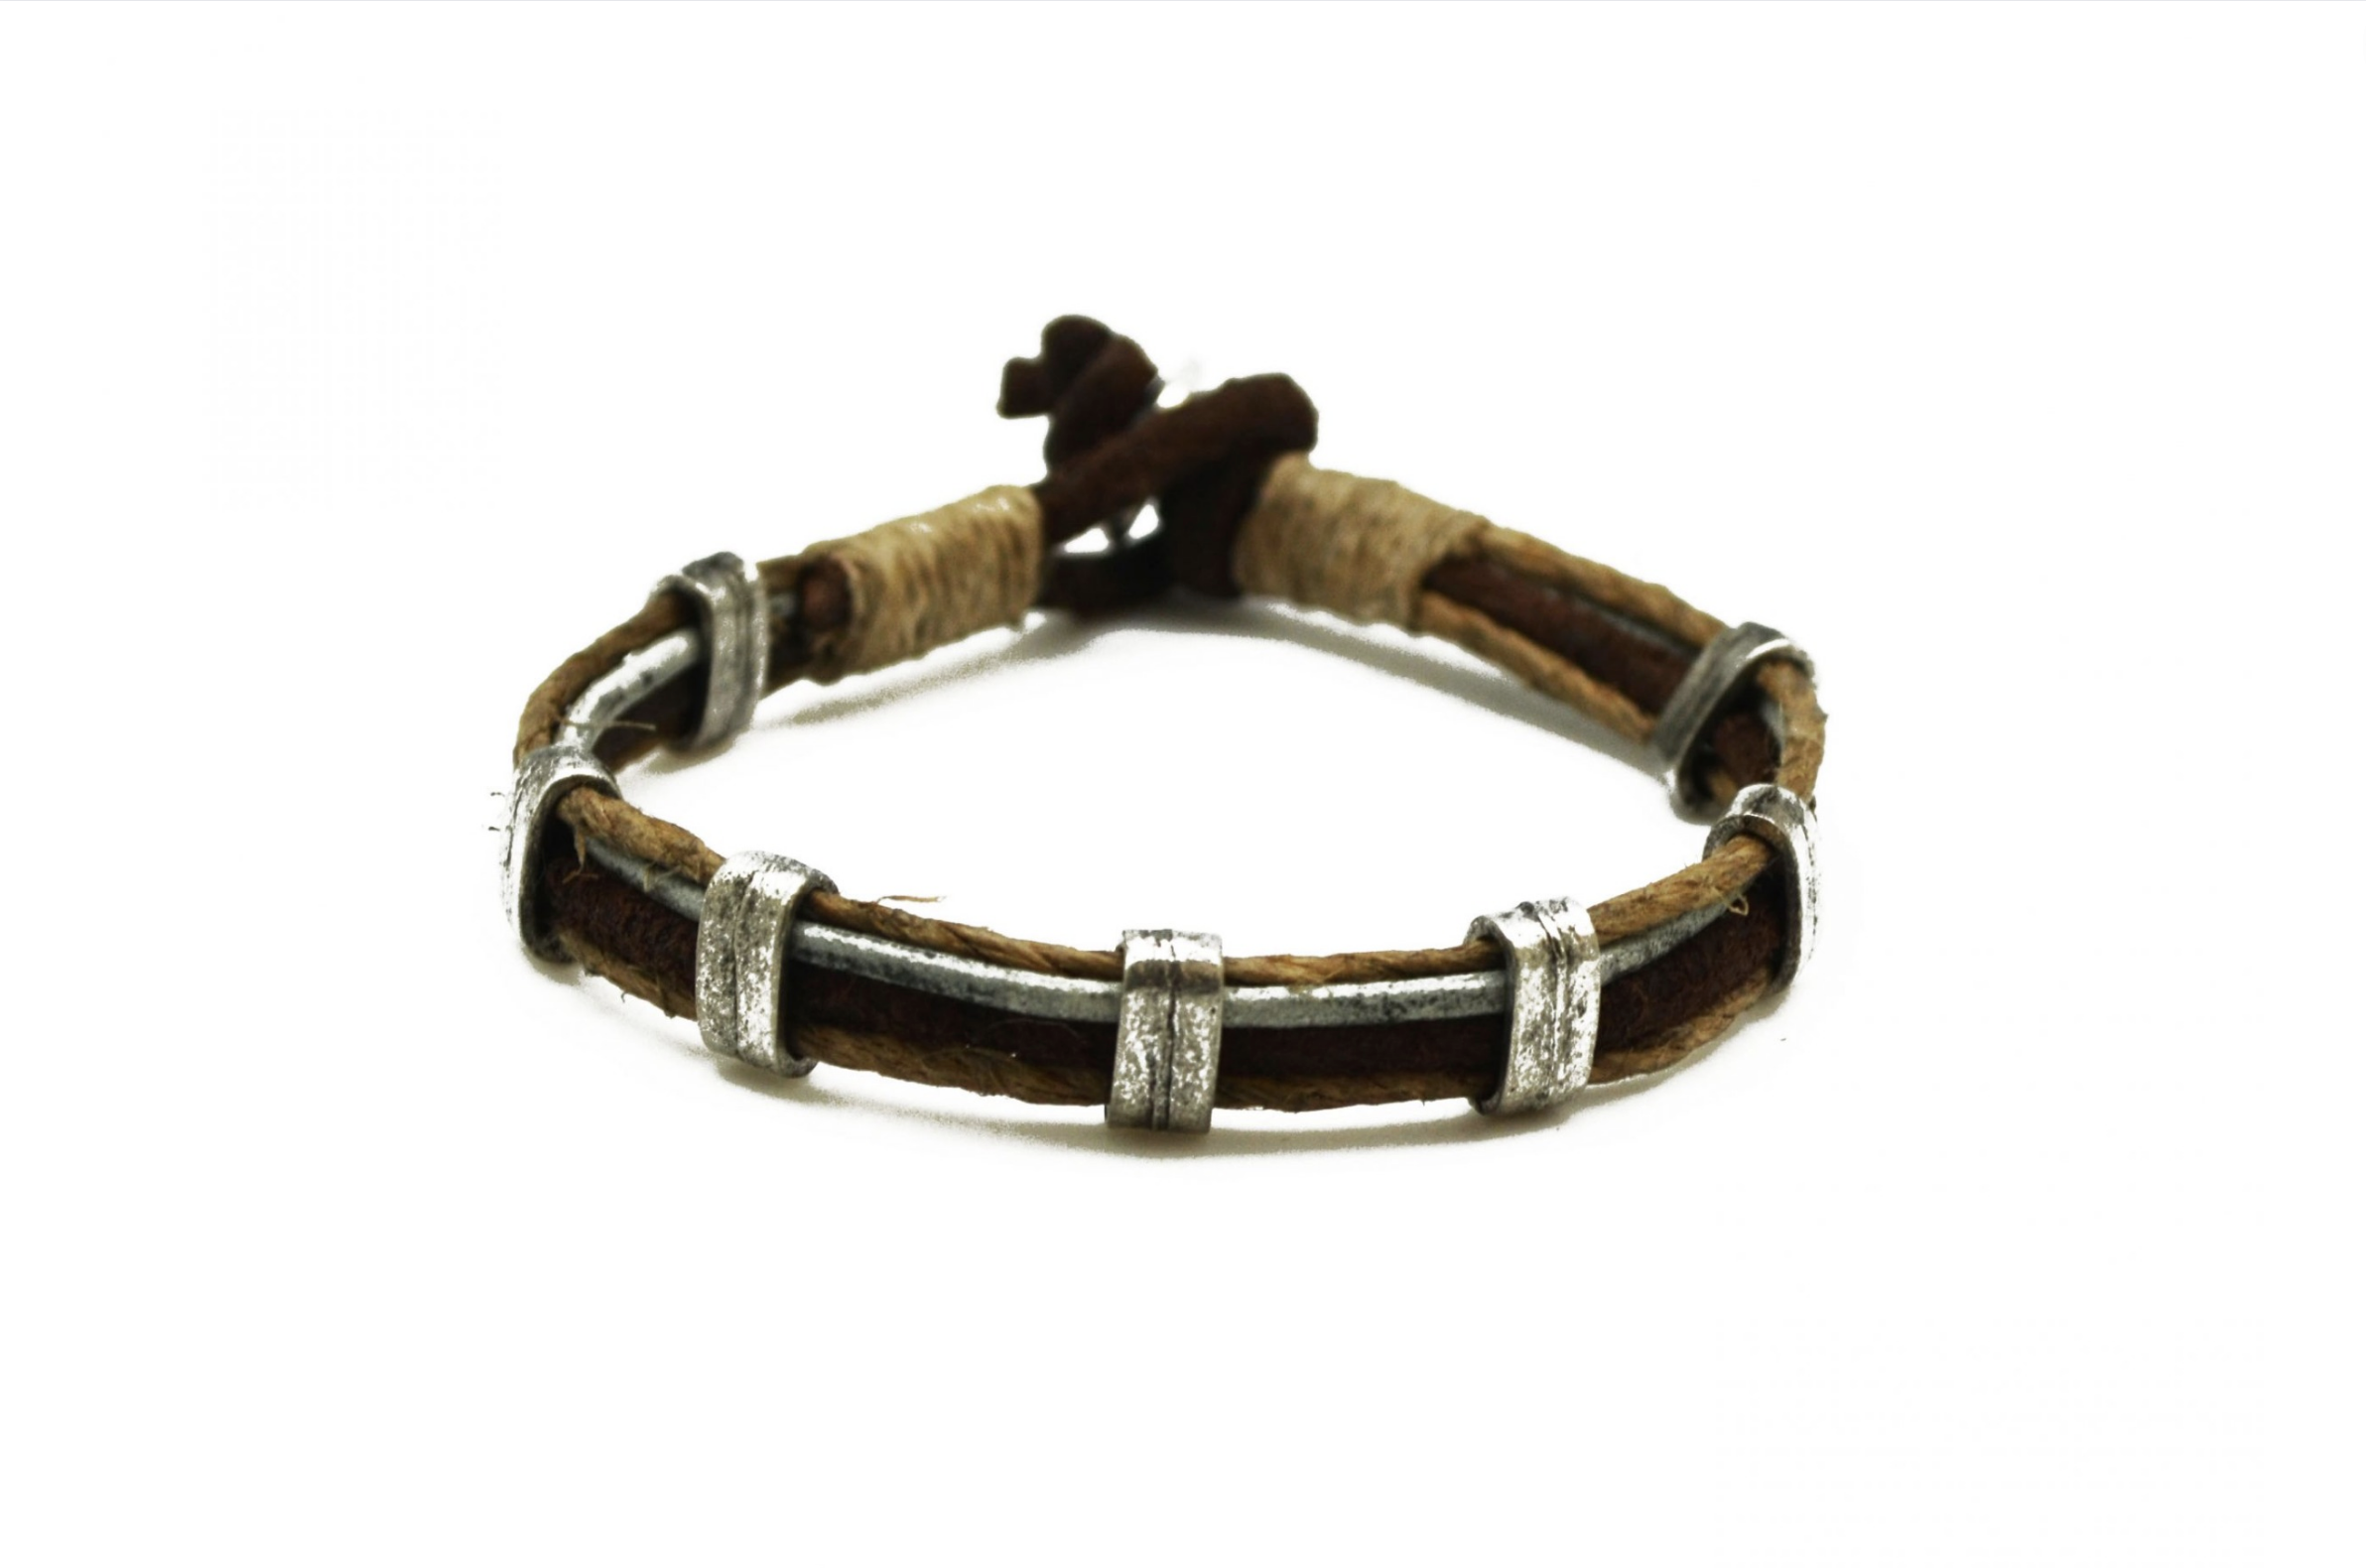 Aadi Brown Leather/Cord with Silver Beads Men's Bracelet